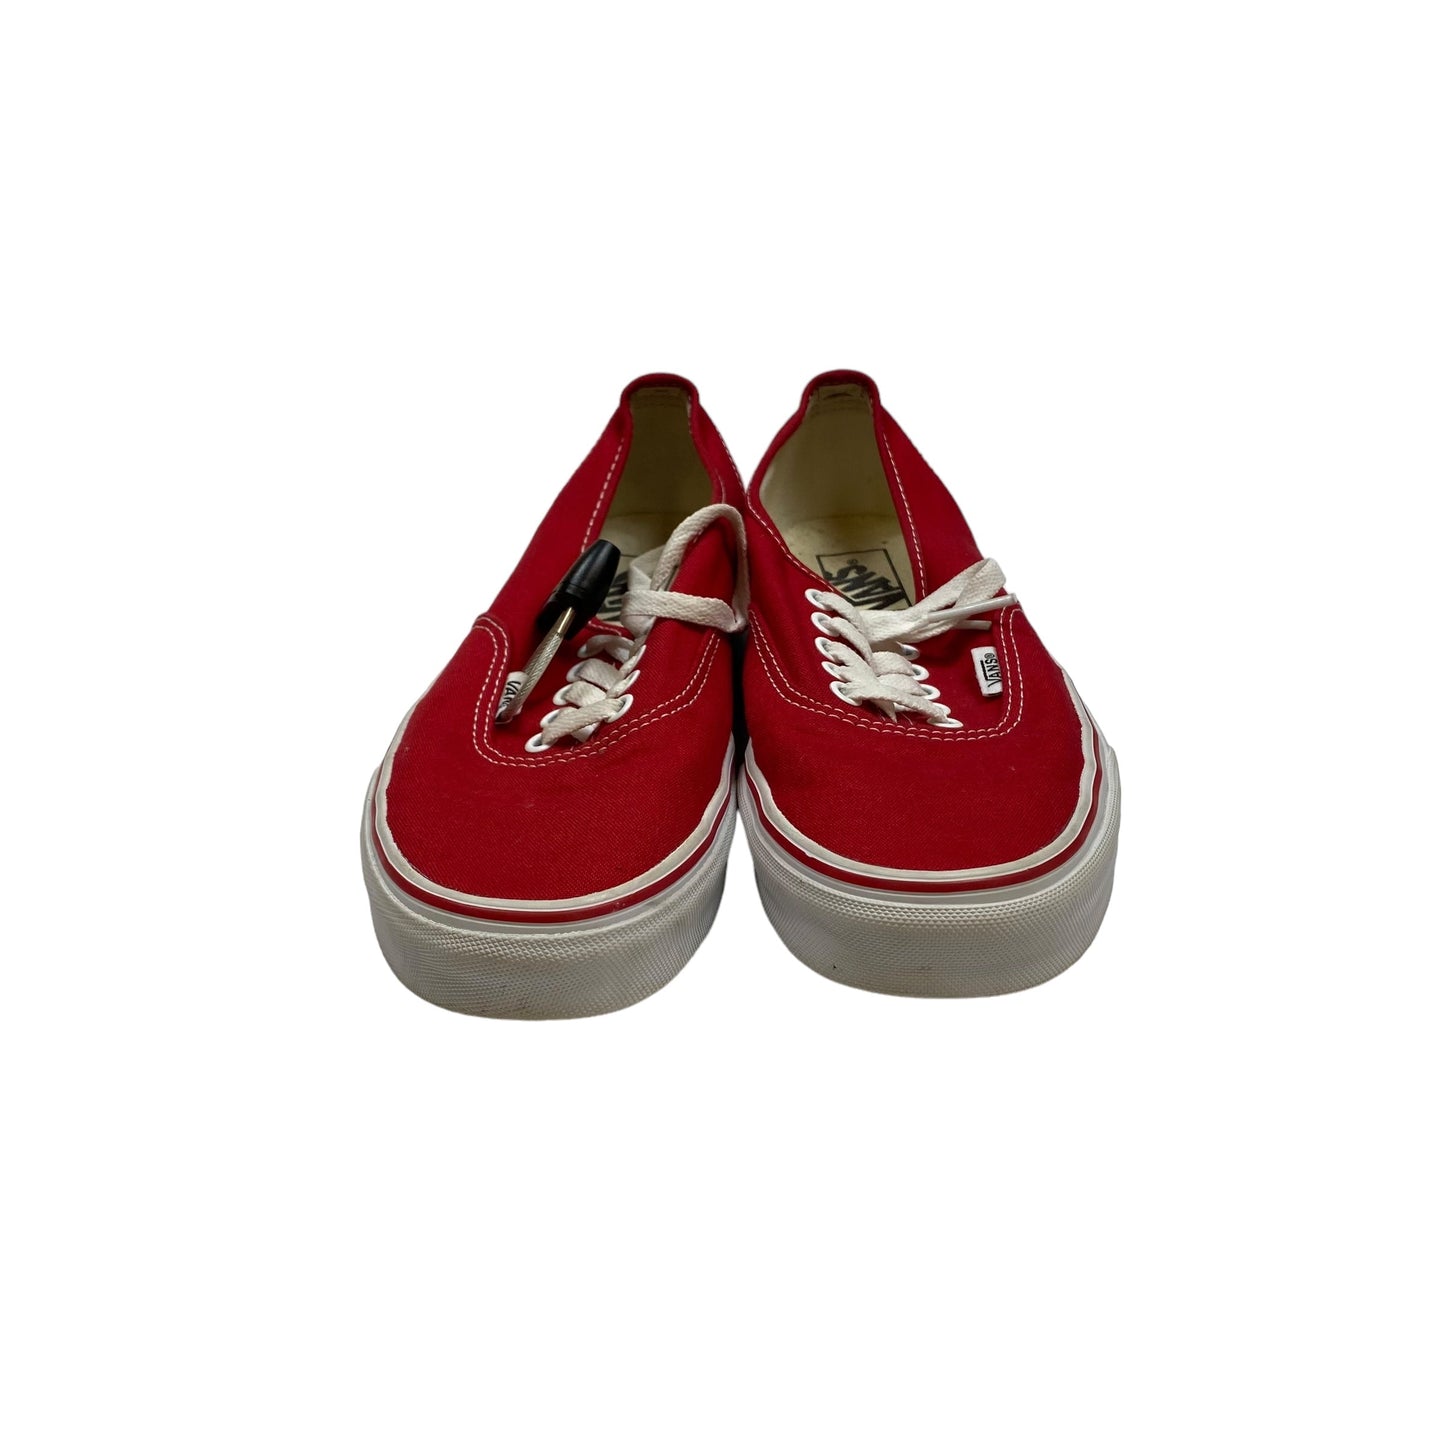 Red Shoes Sneakers Vans, Size 9